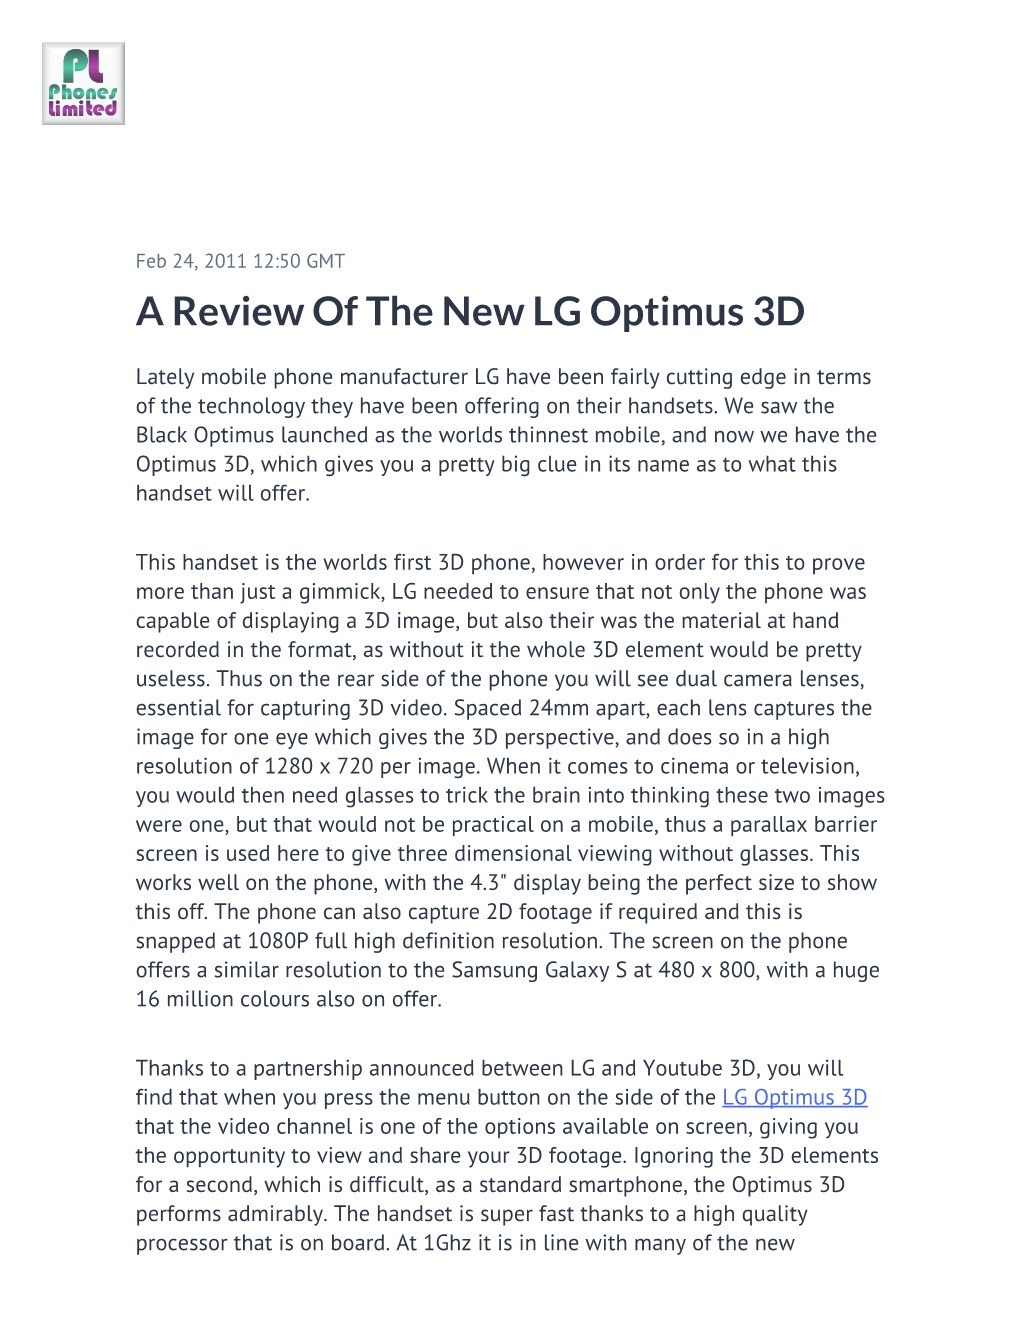 A Review of the New LG Optimus 3D